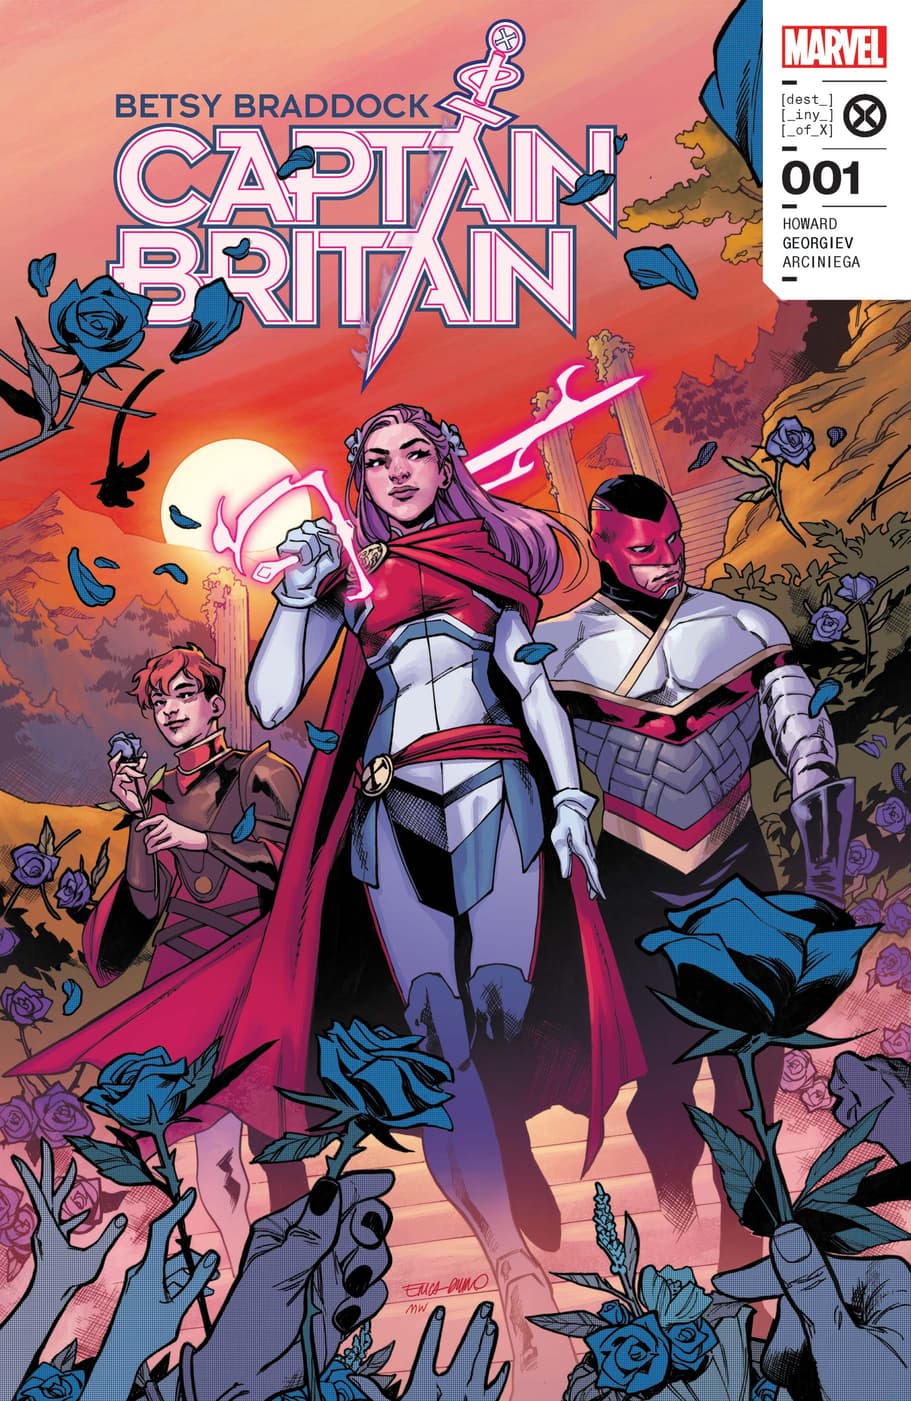 BETSY BRADDOCK: CAPTAIN BRITAIN (2023) #1 cover by Erica D'Urso